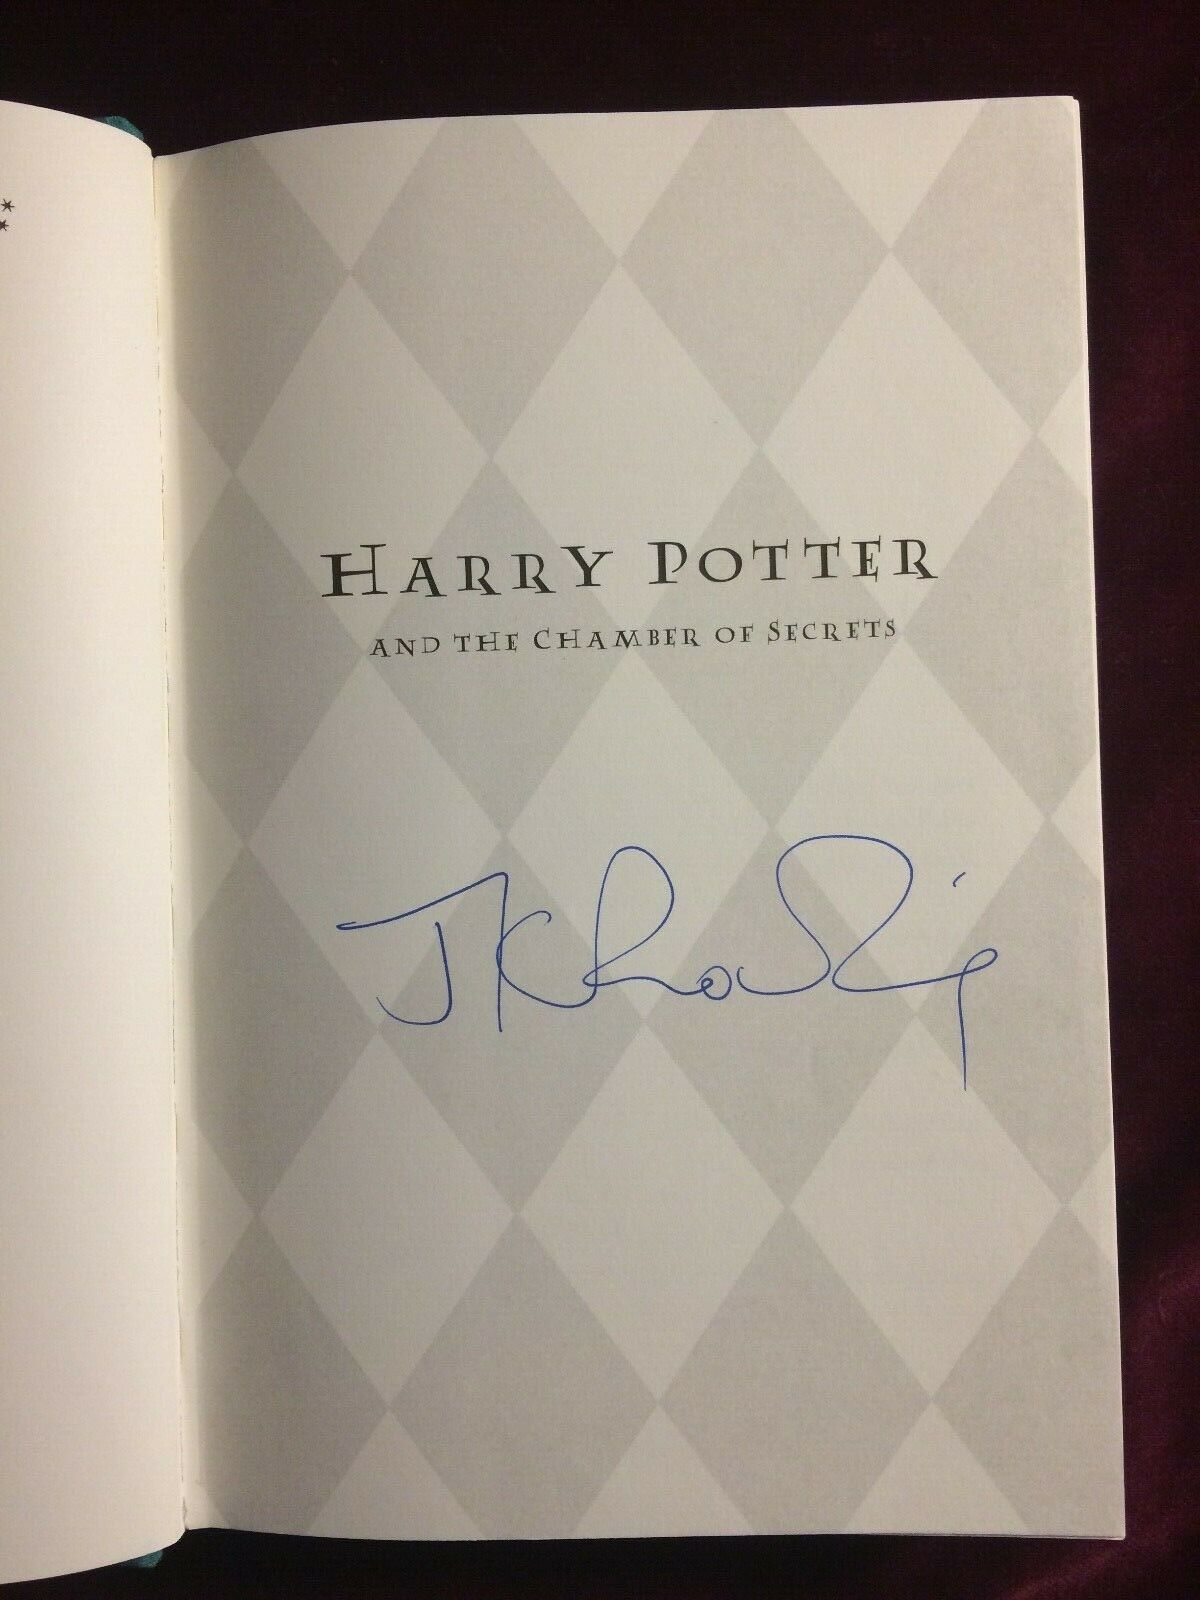 J.K. Rowling signature forgery found inside a Harry Potter and the Chamber of Secrets on eBay. Sold by DollPainte-0 for GBP 147.00.